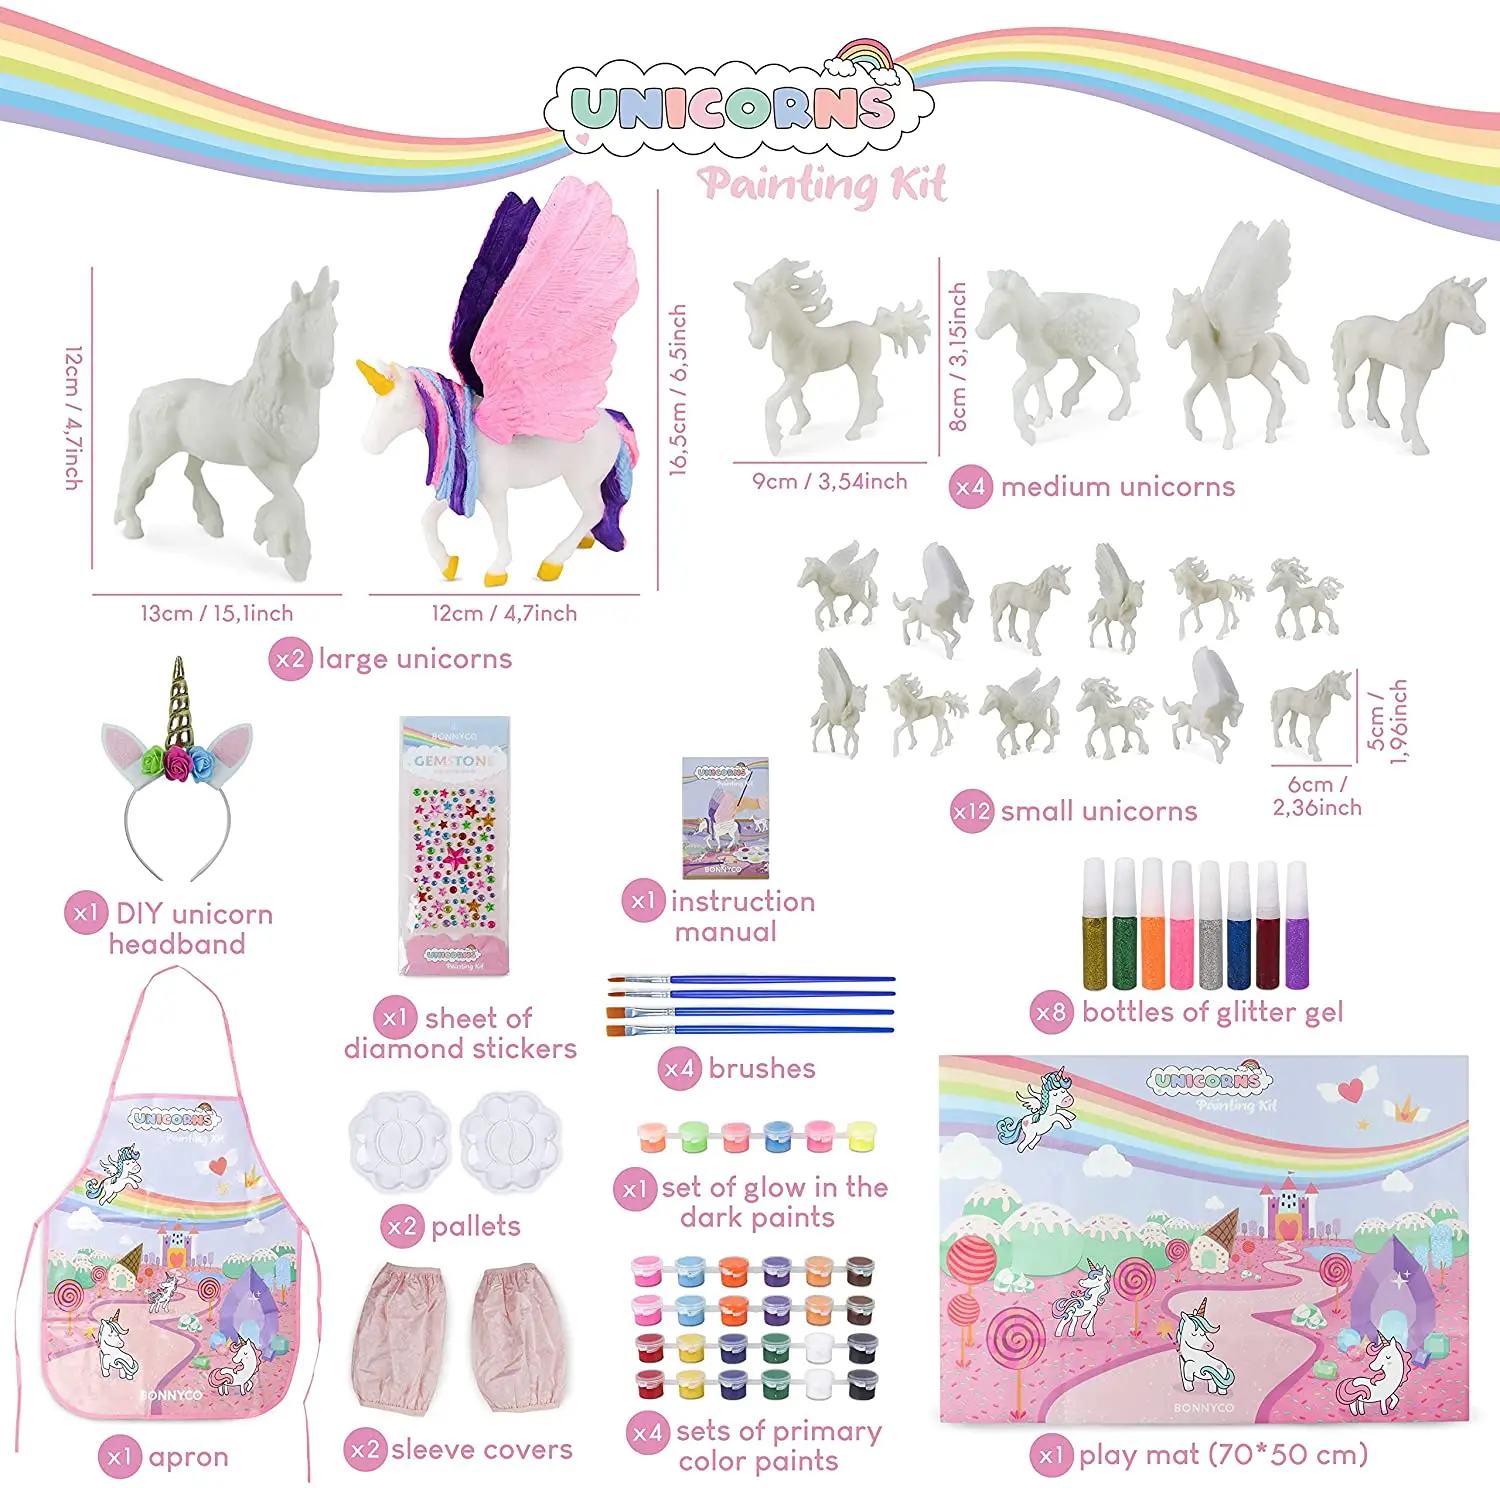 Yoytoo Unicorn Coloring Pads Kit for Girls, Unicorn Coloring Book with 60 Coloring Pages and 16 Colored Pencils for Drawing Painting, Travel